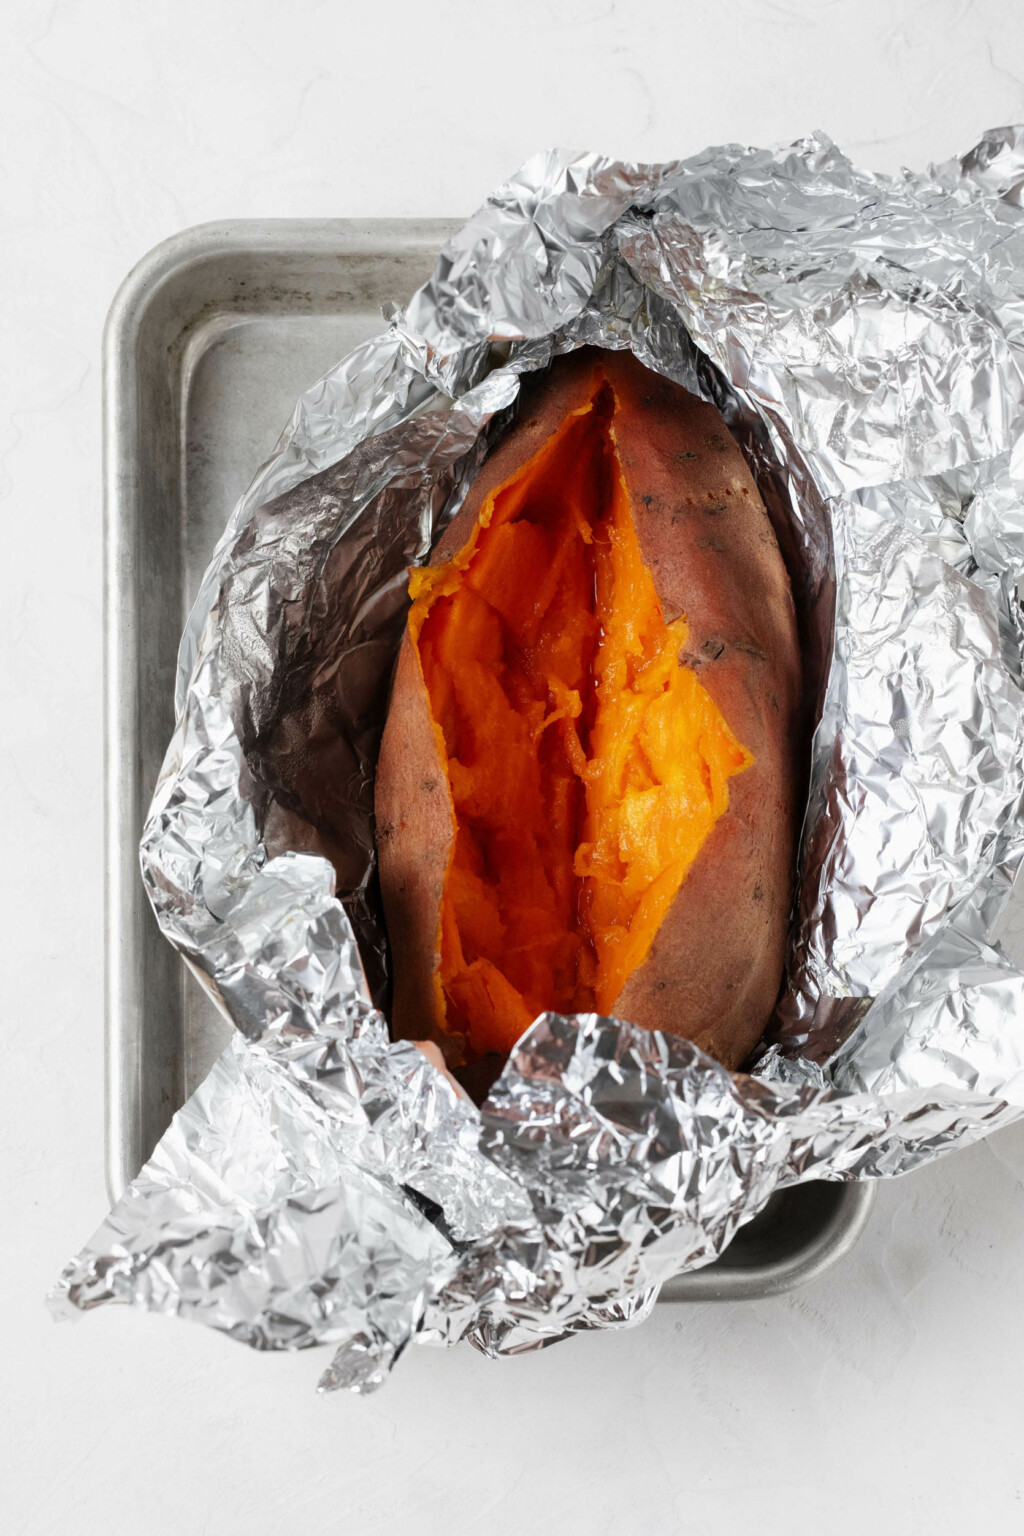 An overhead image of a baked sweet potato, wrapped in foil and resting on a small baking sheet.